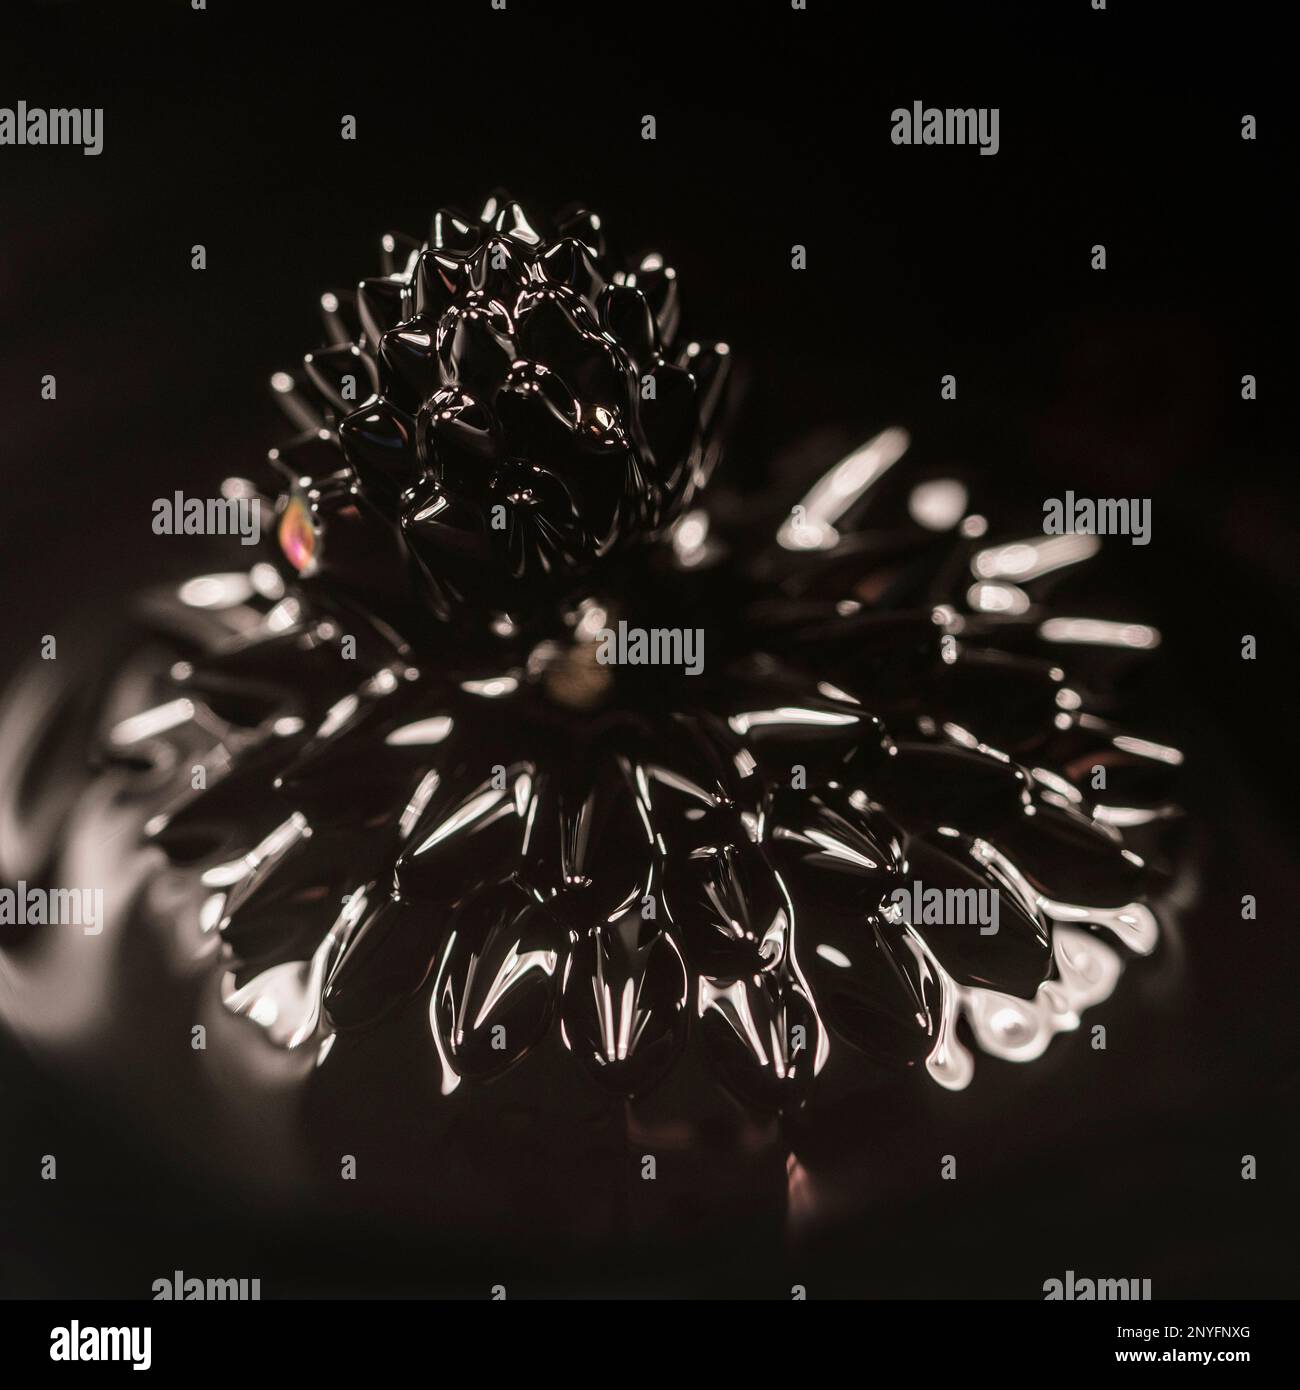 https://c8.alamy.com/comp/2NYFNXG/abstract-backdrop-with-high-angle-closeup-shot-of-brown-ferrofluid-with-amazing-forms-during-magnetized-effect-in-presence-of-a-magnetic-field-2NYFNXG.jpg